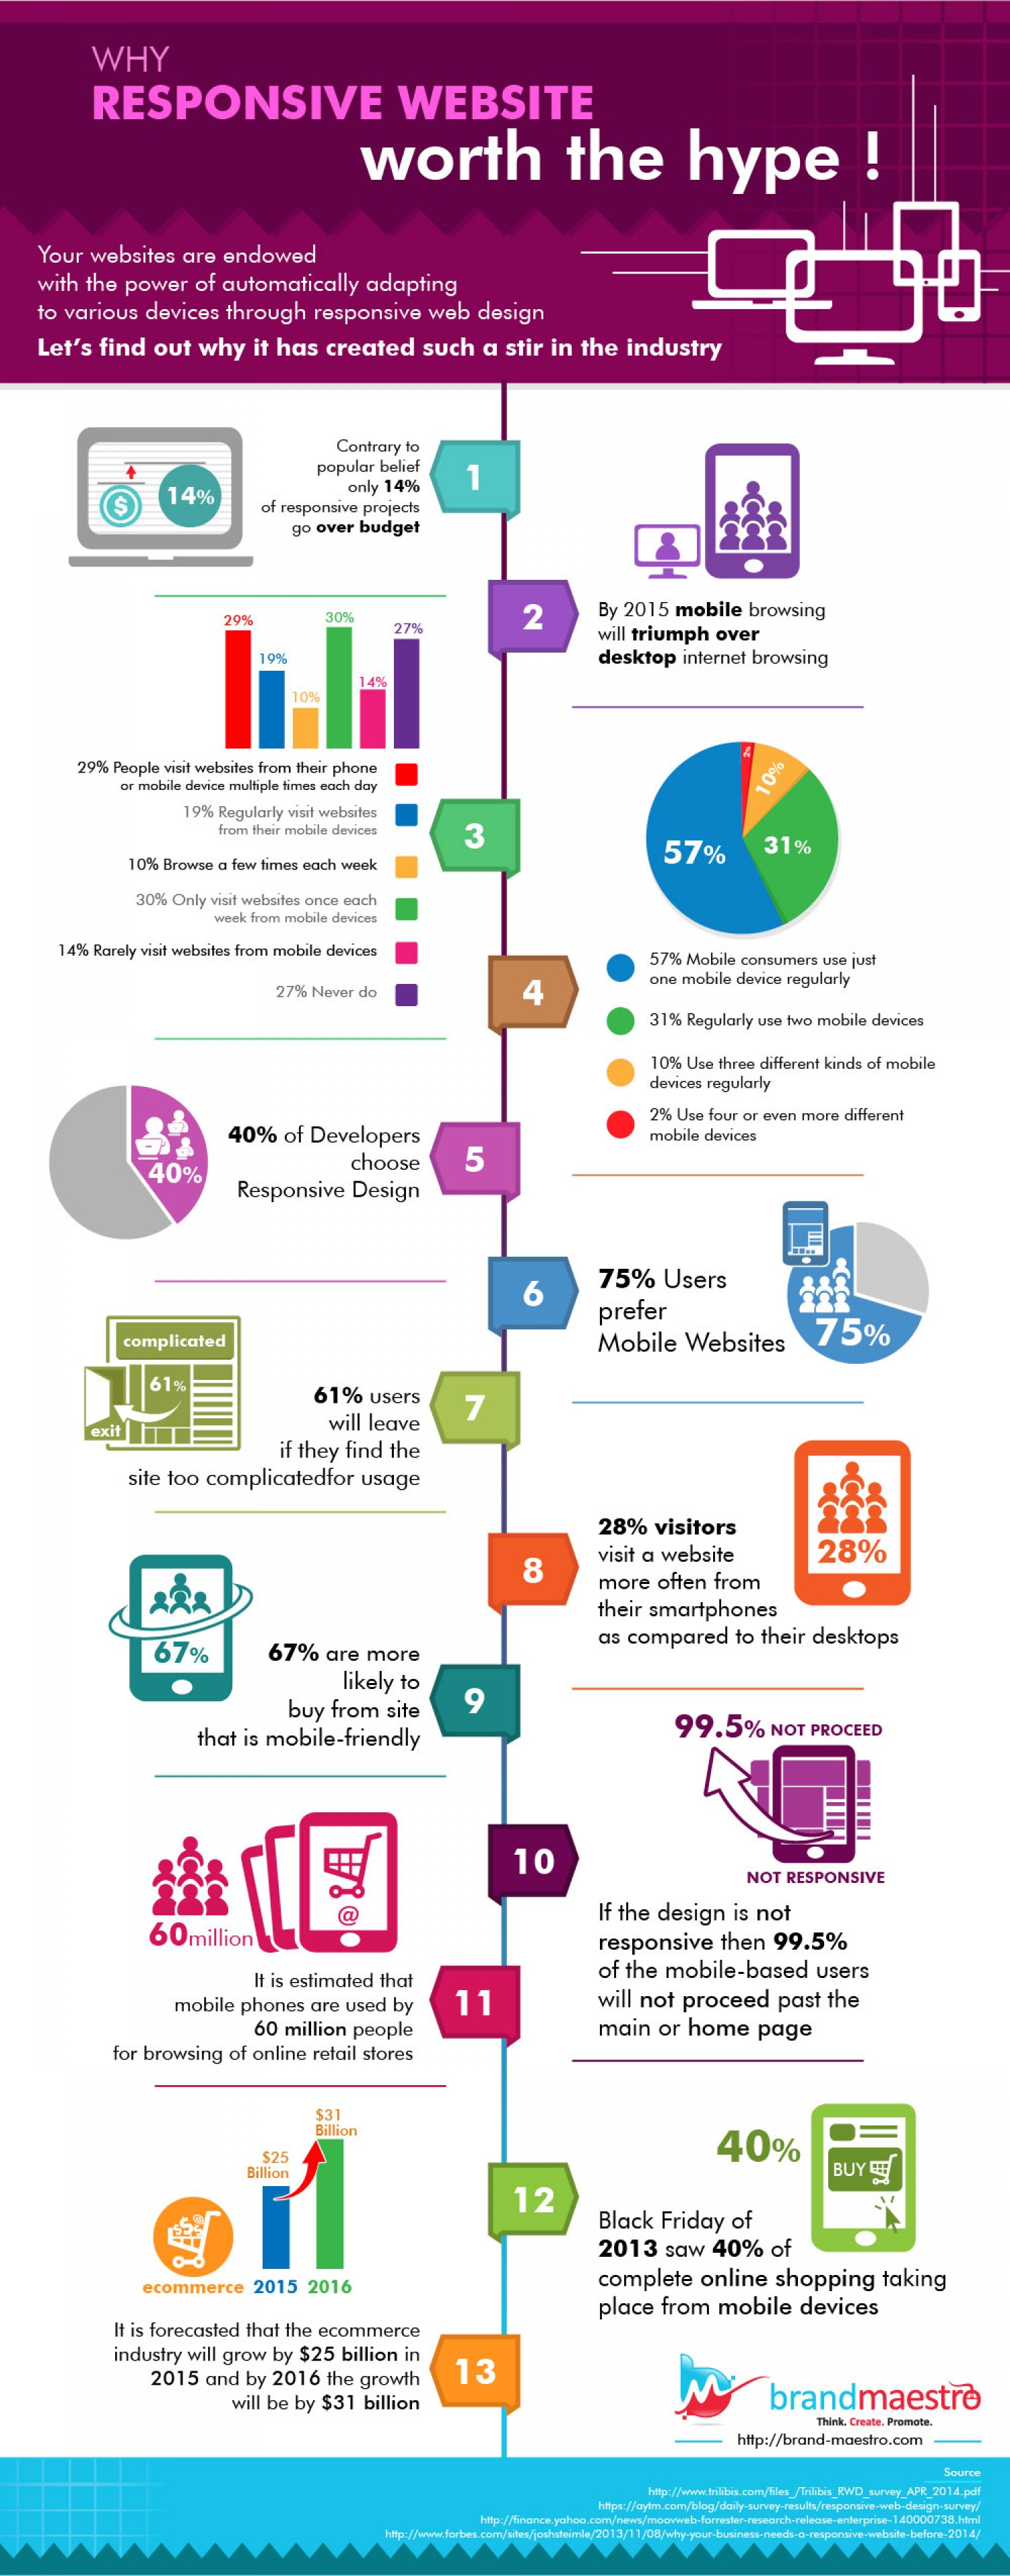 why-responsive-website-worth-the-hype--stats-infographic_53c659e879e9d_w1500